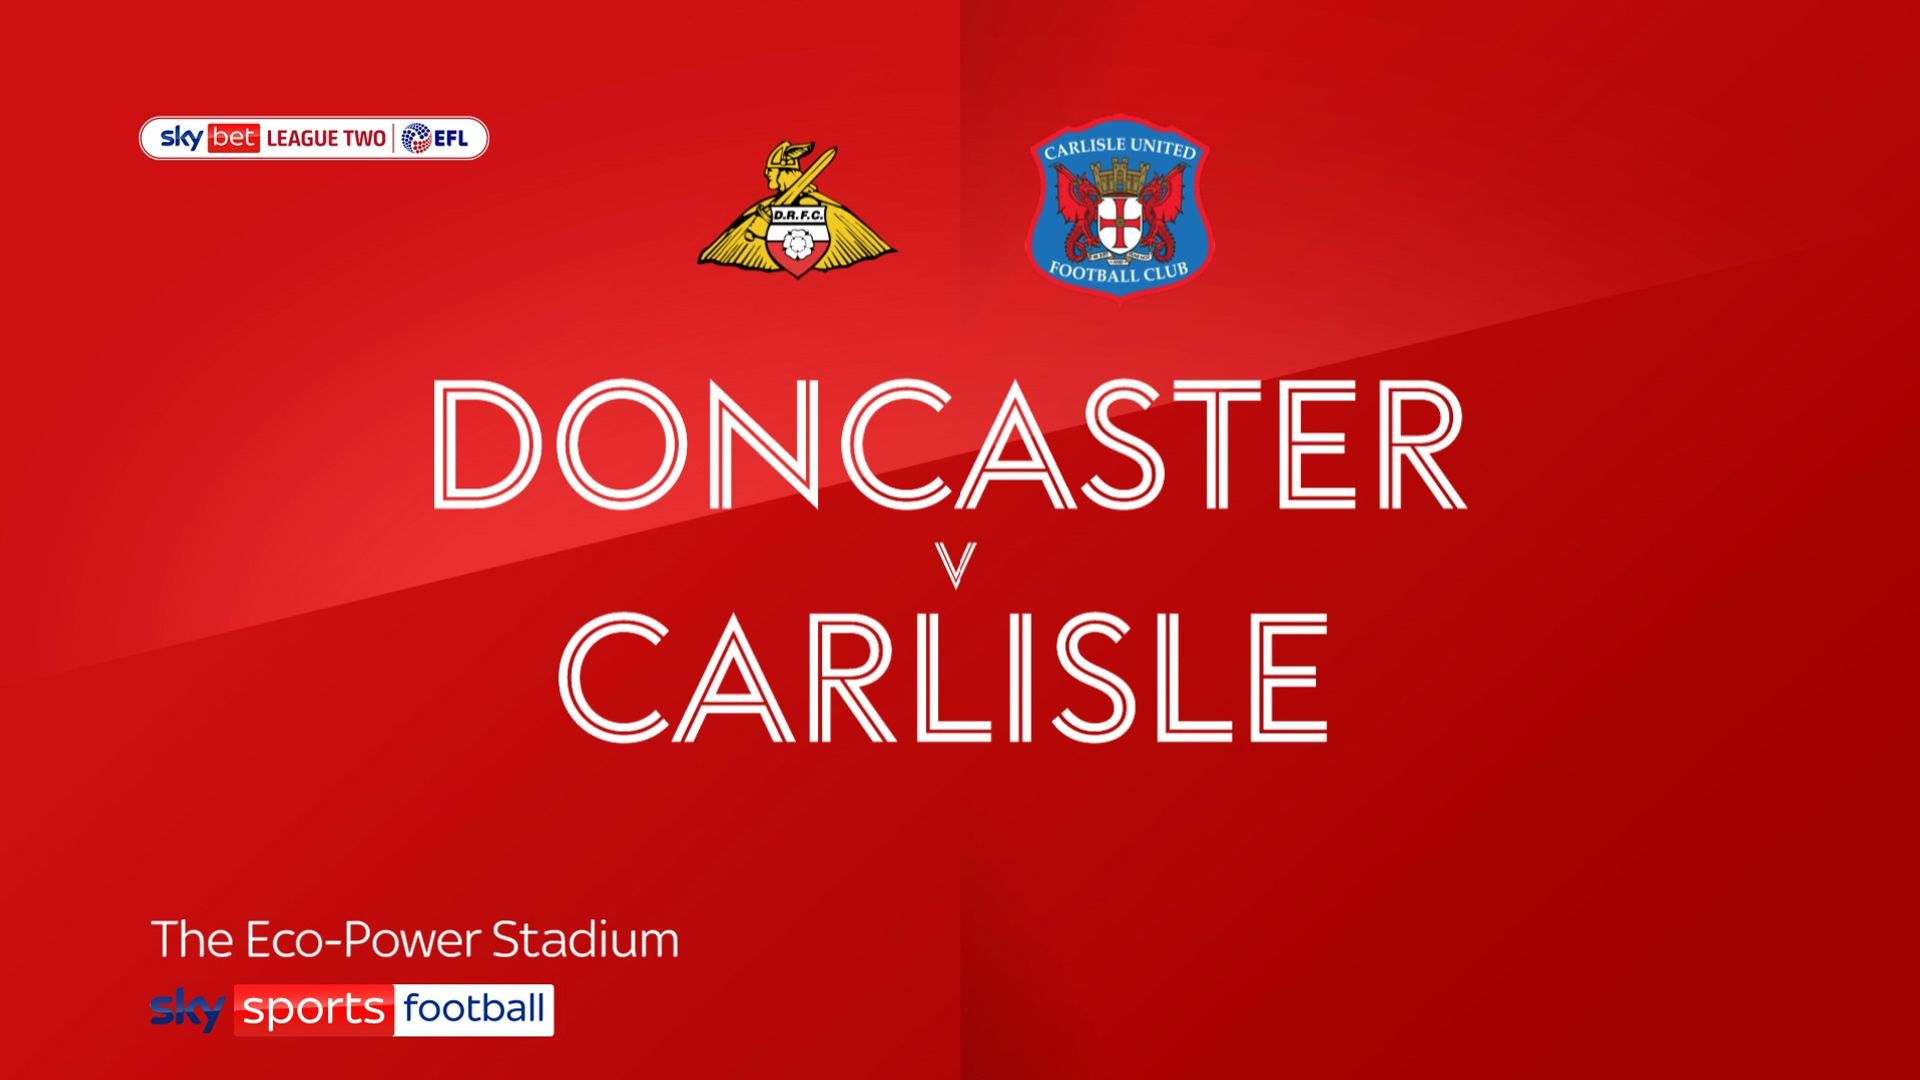 Doncaster display play-off credentials with Carlisle win